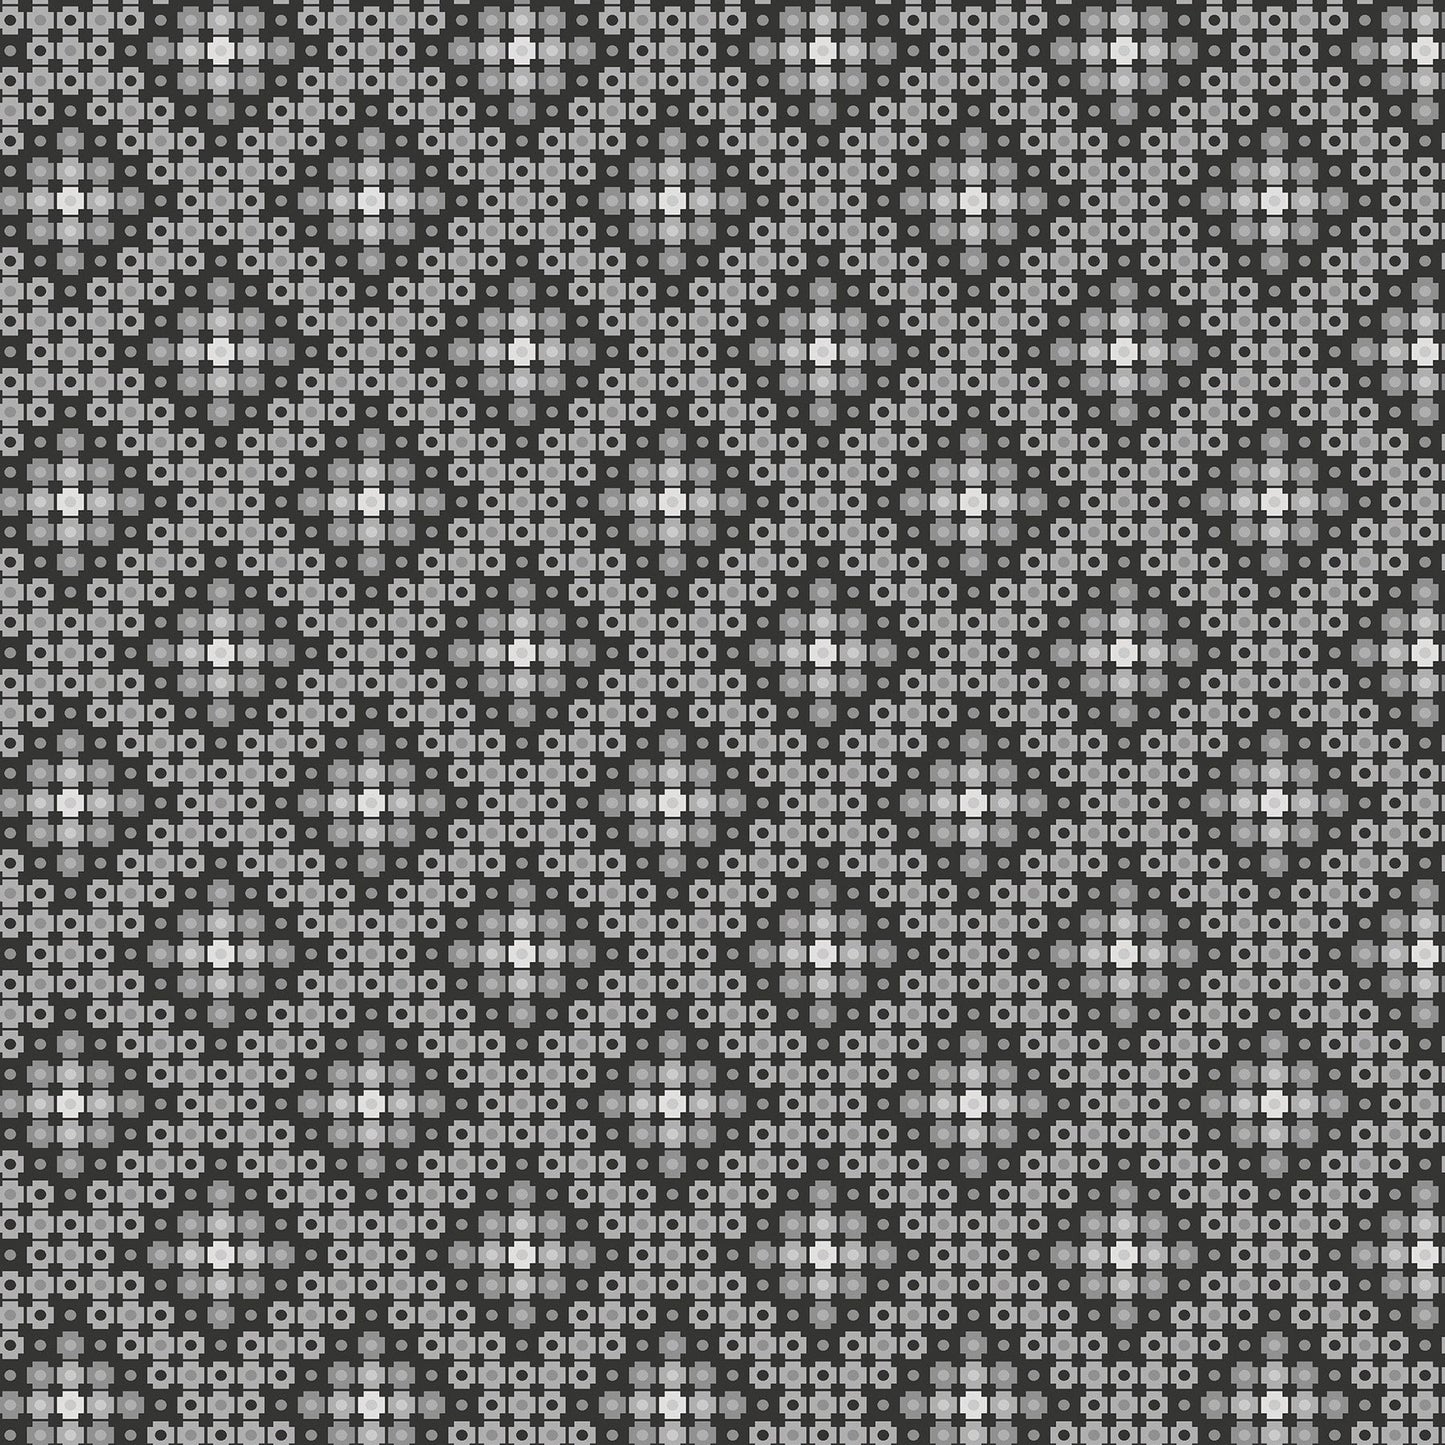  Crossweave in charcoal (13266-13)  is from Stitchy by Christa Watson for Benartex. The crossweave print features pixelated shapes in shades of gray ranging from white to black. The geometric pattern creates a striking contrast to the modern blenders presented in the rest of the line, and provides a balanced texture and interest to your project.